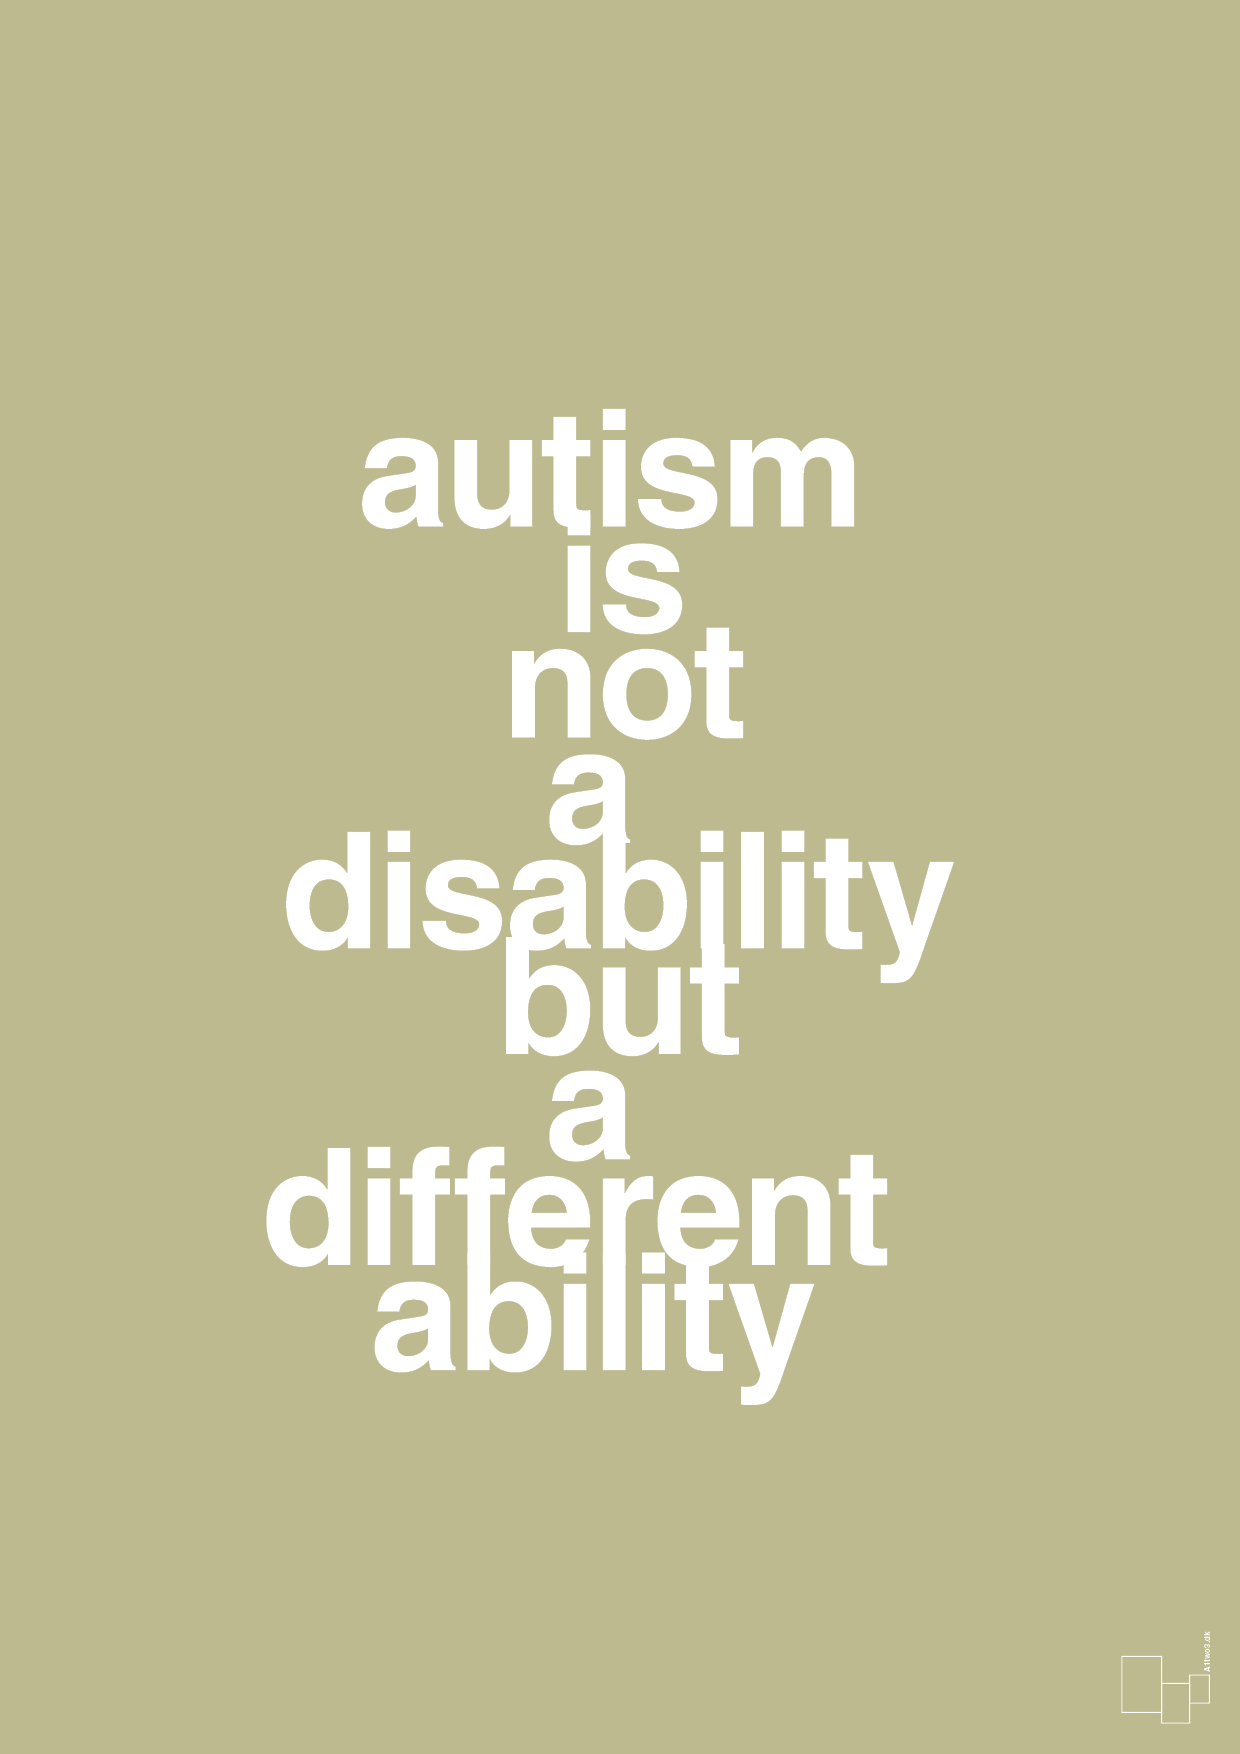 autism is not a disability but a different ability - Plakat med Samfund i Back to Nature